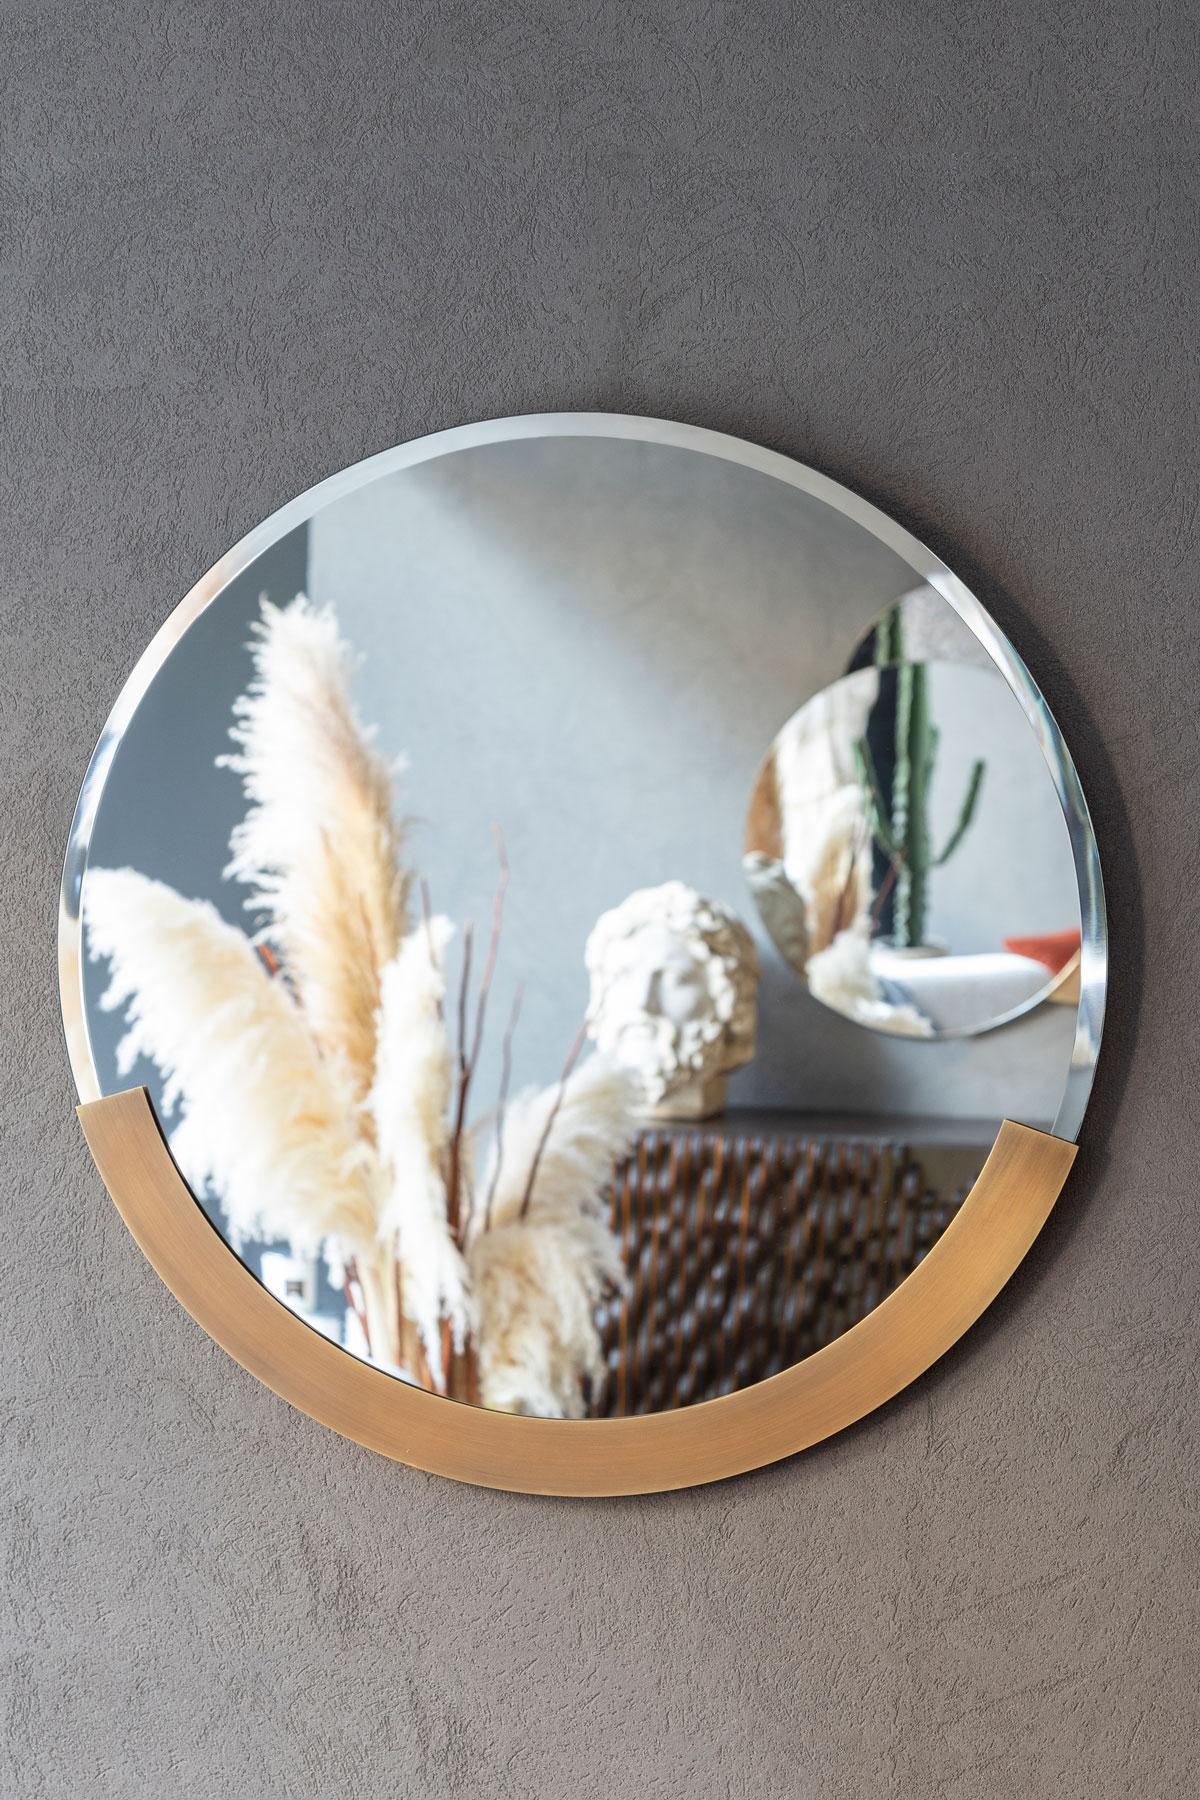 Daisy mirror that reflects you in its simplest form...

In its simplest form, DAISY MIRROR reflects you... Lagu brings you the simplest and most modern piece of the mirror series. Alongside its minimalist design, the brass detail adds a unique touch